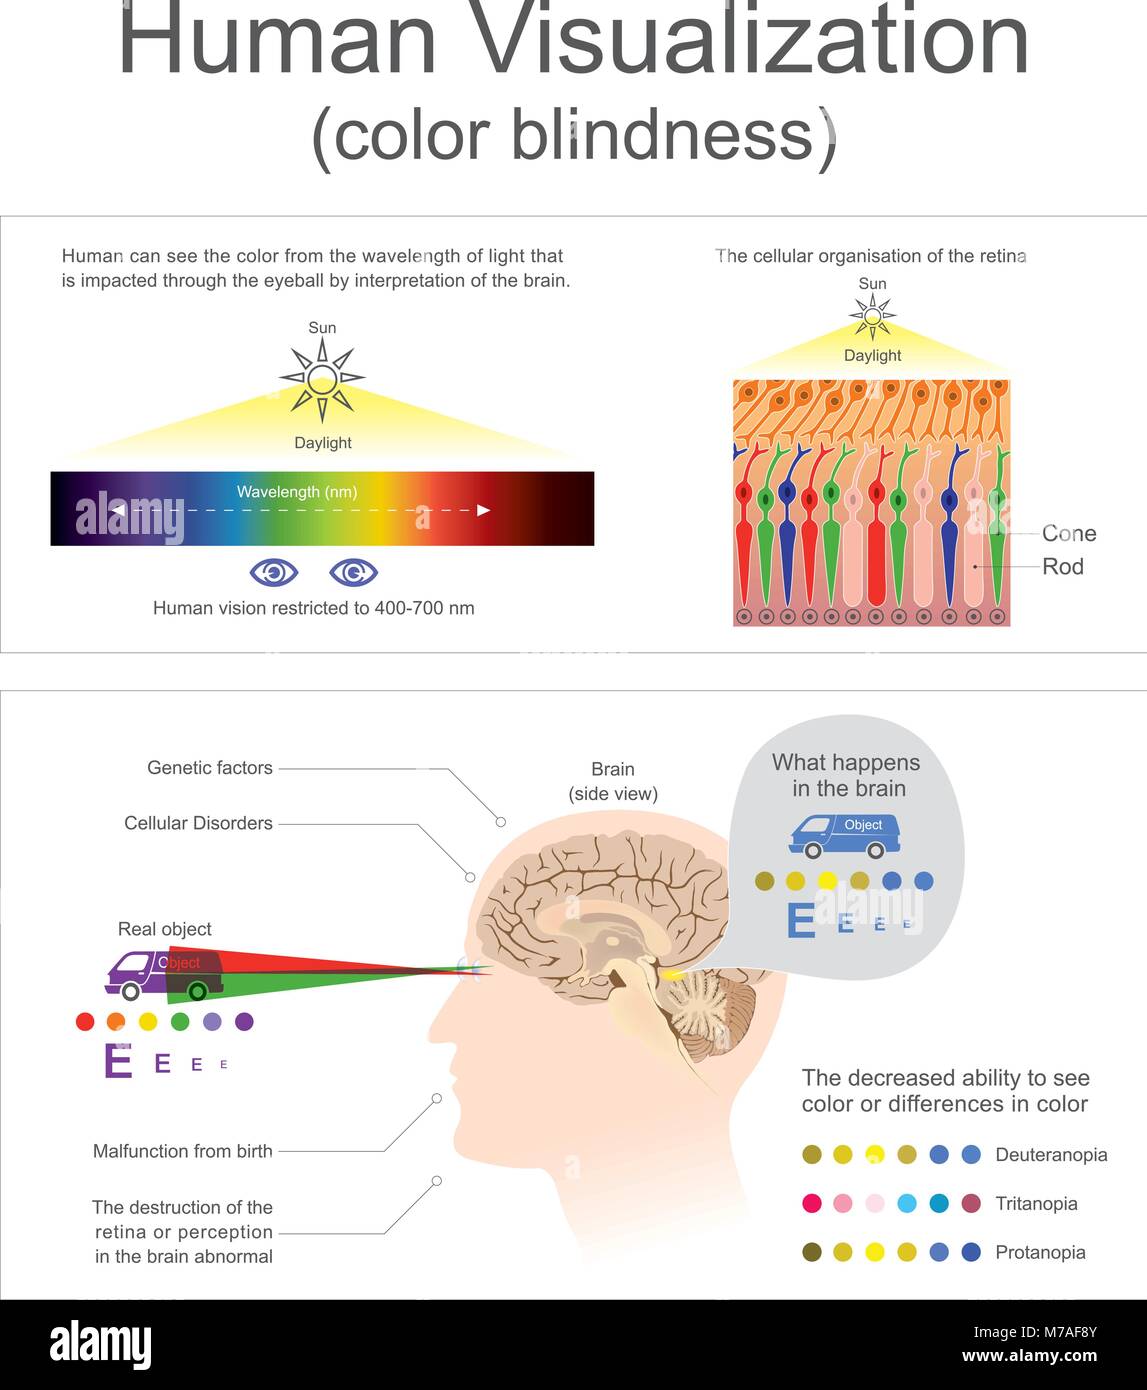 Human can see the color from wavelength of light The destruction of the retina or perception in the brain abnormal Stock Vector